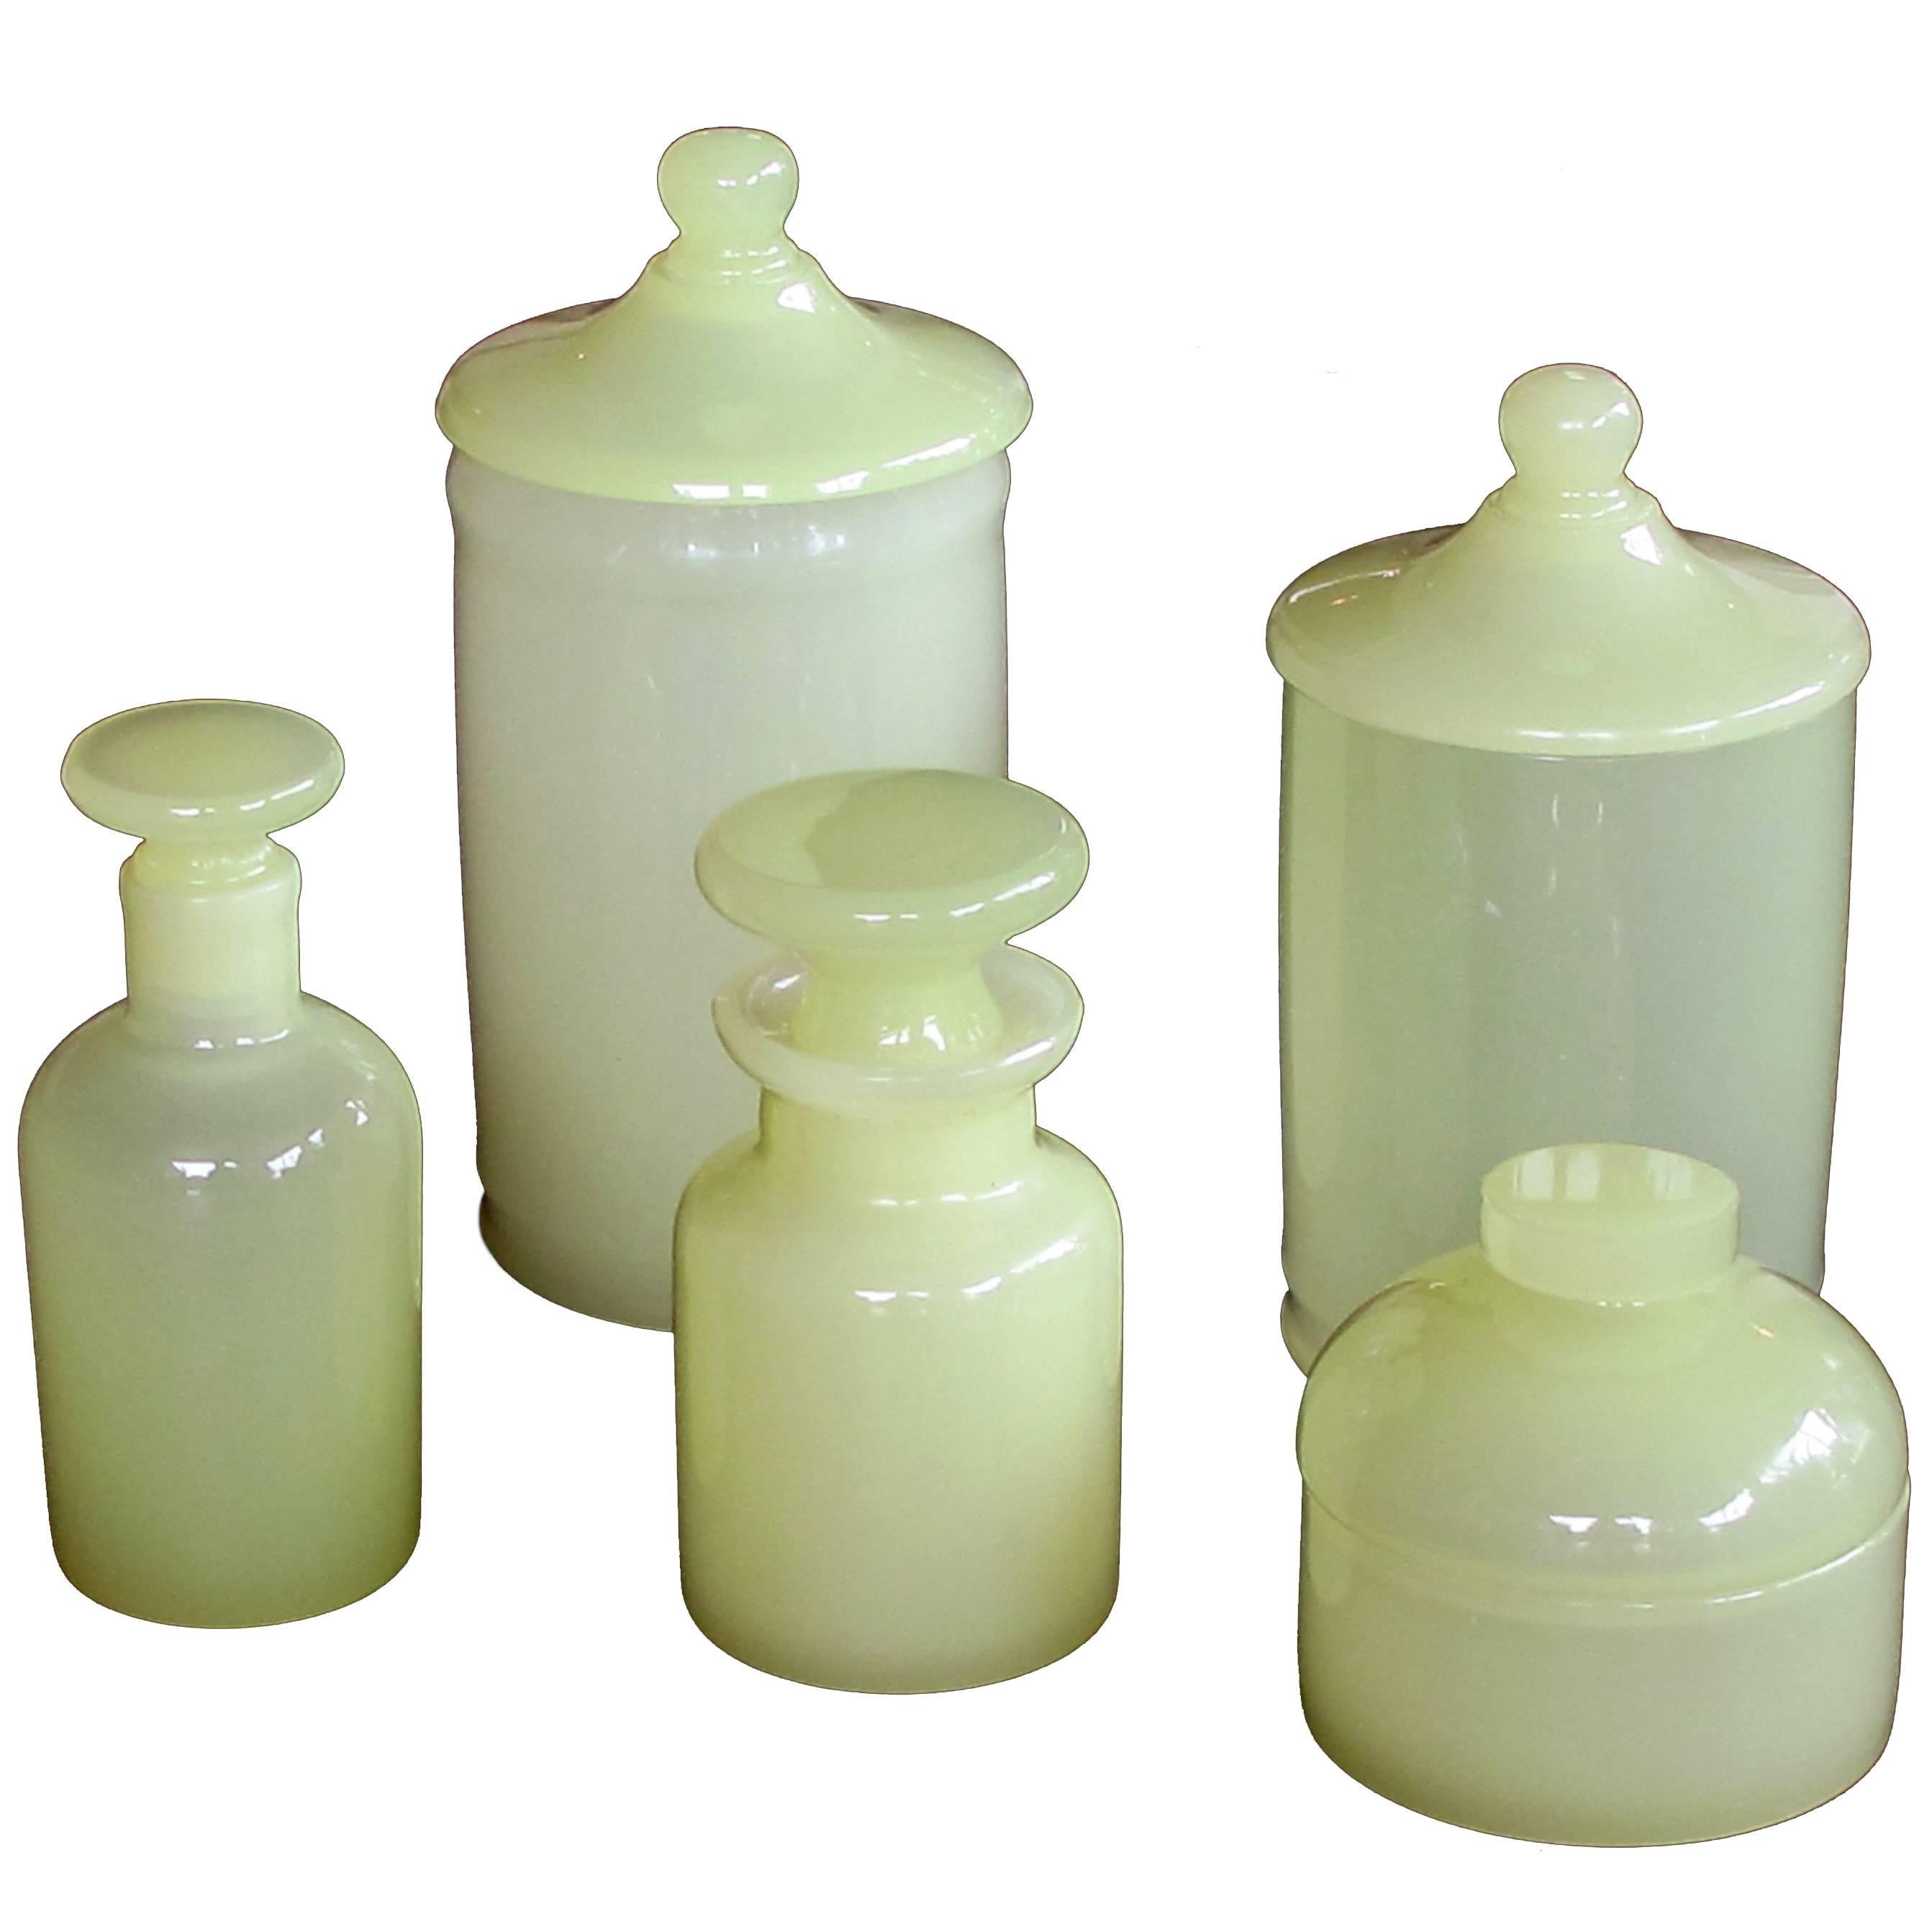 Luminous Set of Murano Cenedese Midcentury Vessels of Pale Chartreuse Glass